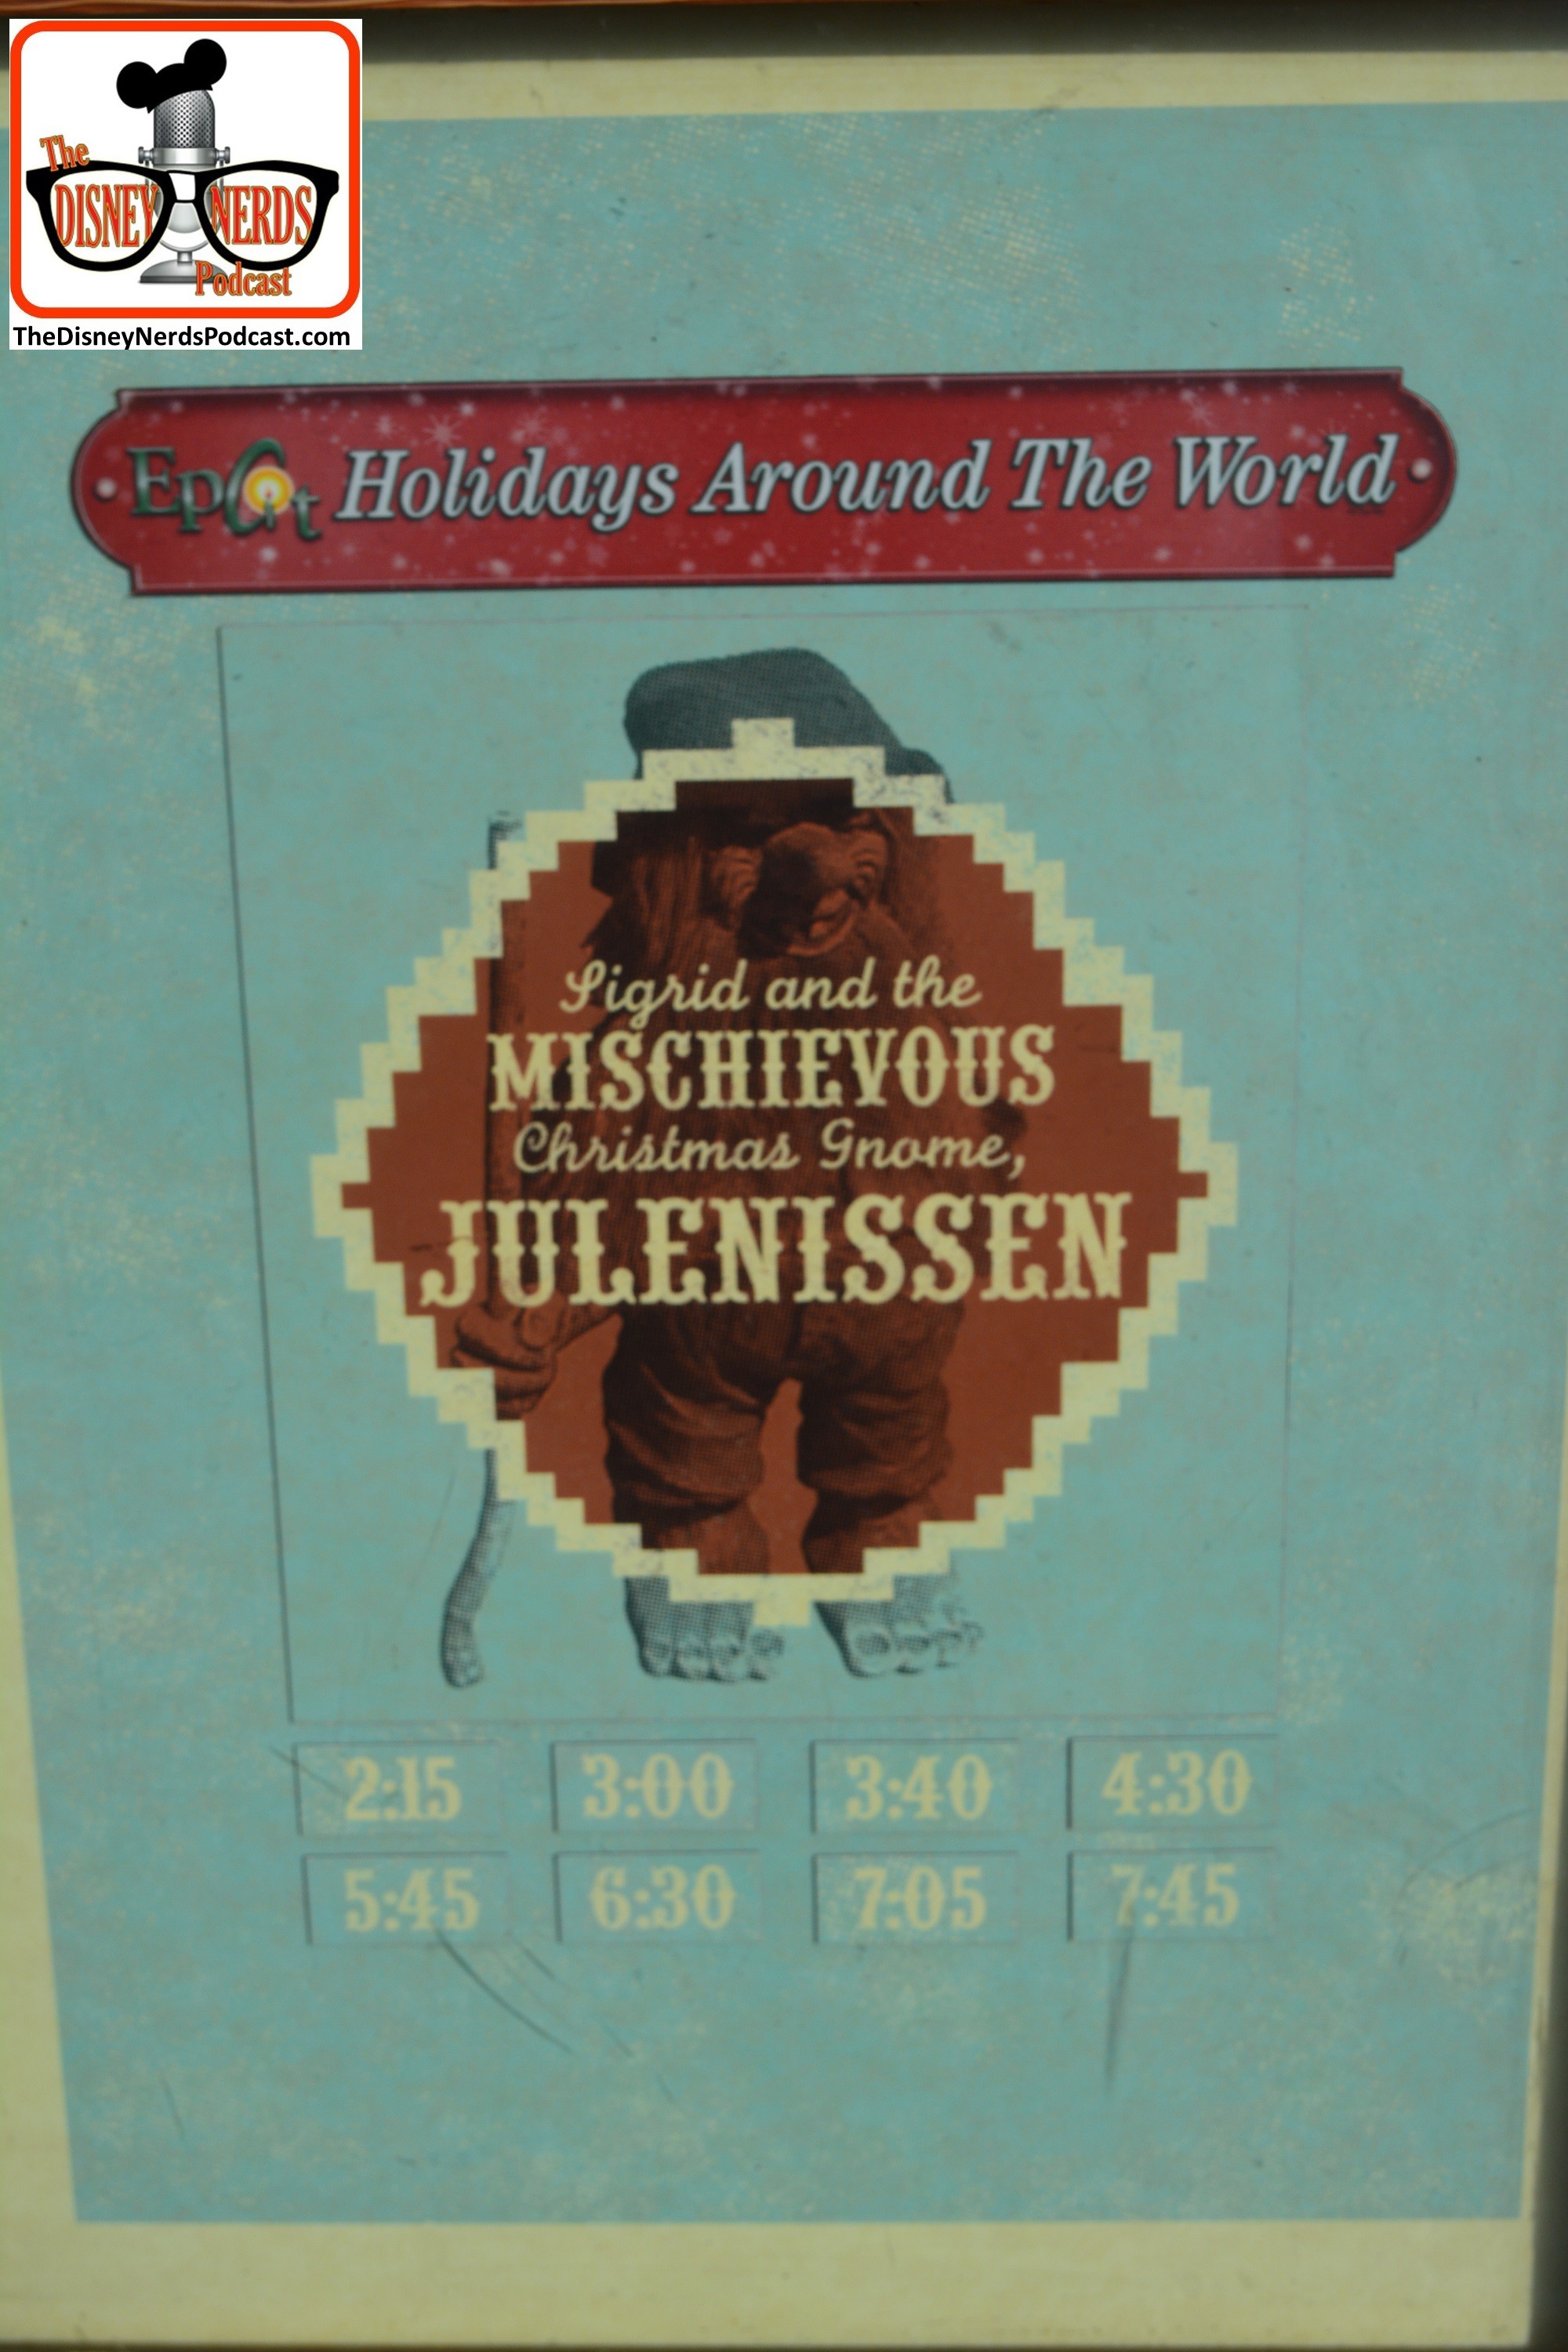 2015-12 - Epcot - Holidays Around the World Display in Norway Sigrid and Juienissen tell us of the joy of the season... Julenissen is a very mischievous Christmas Gnome